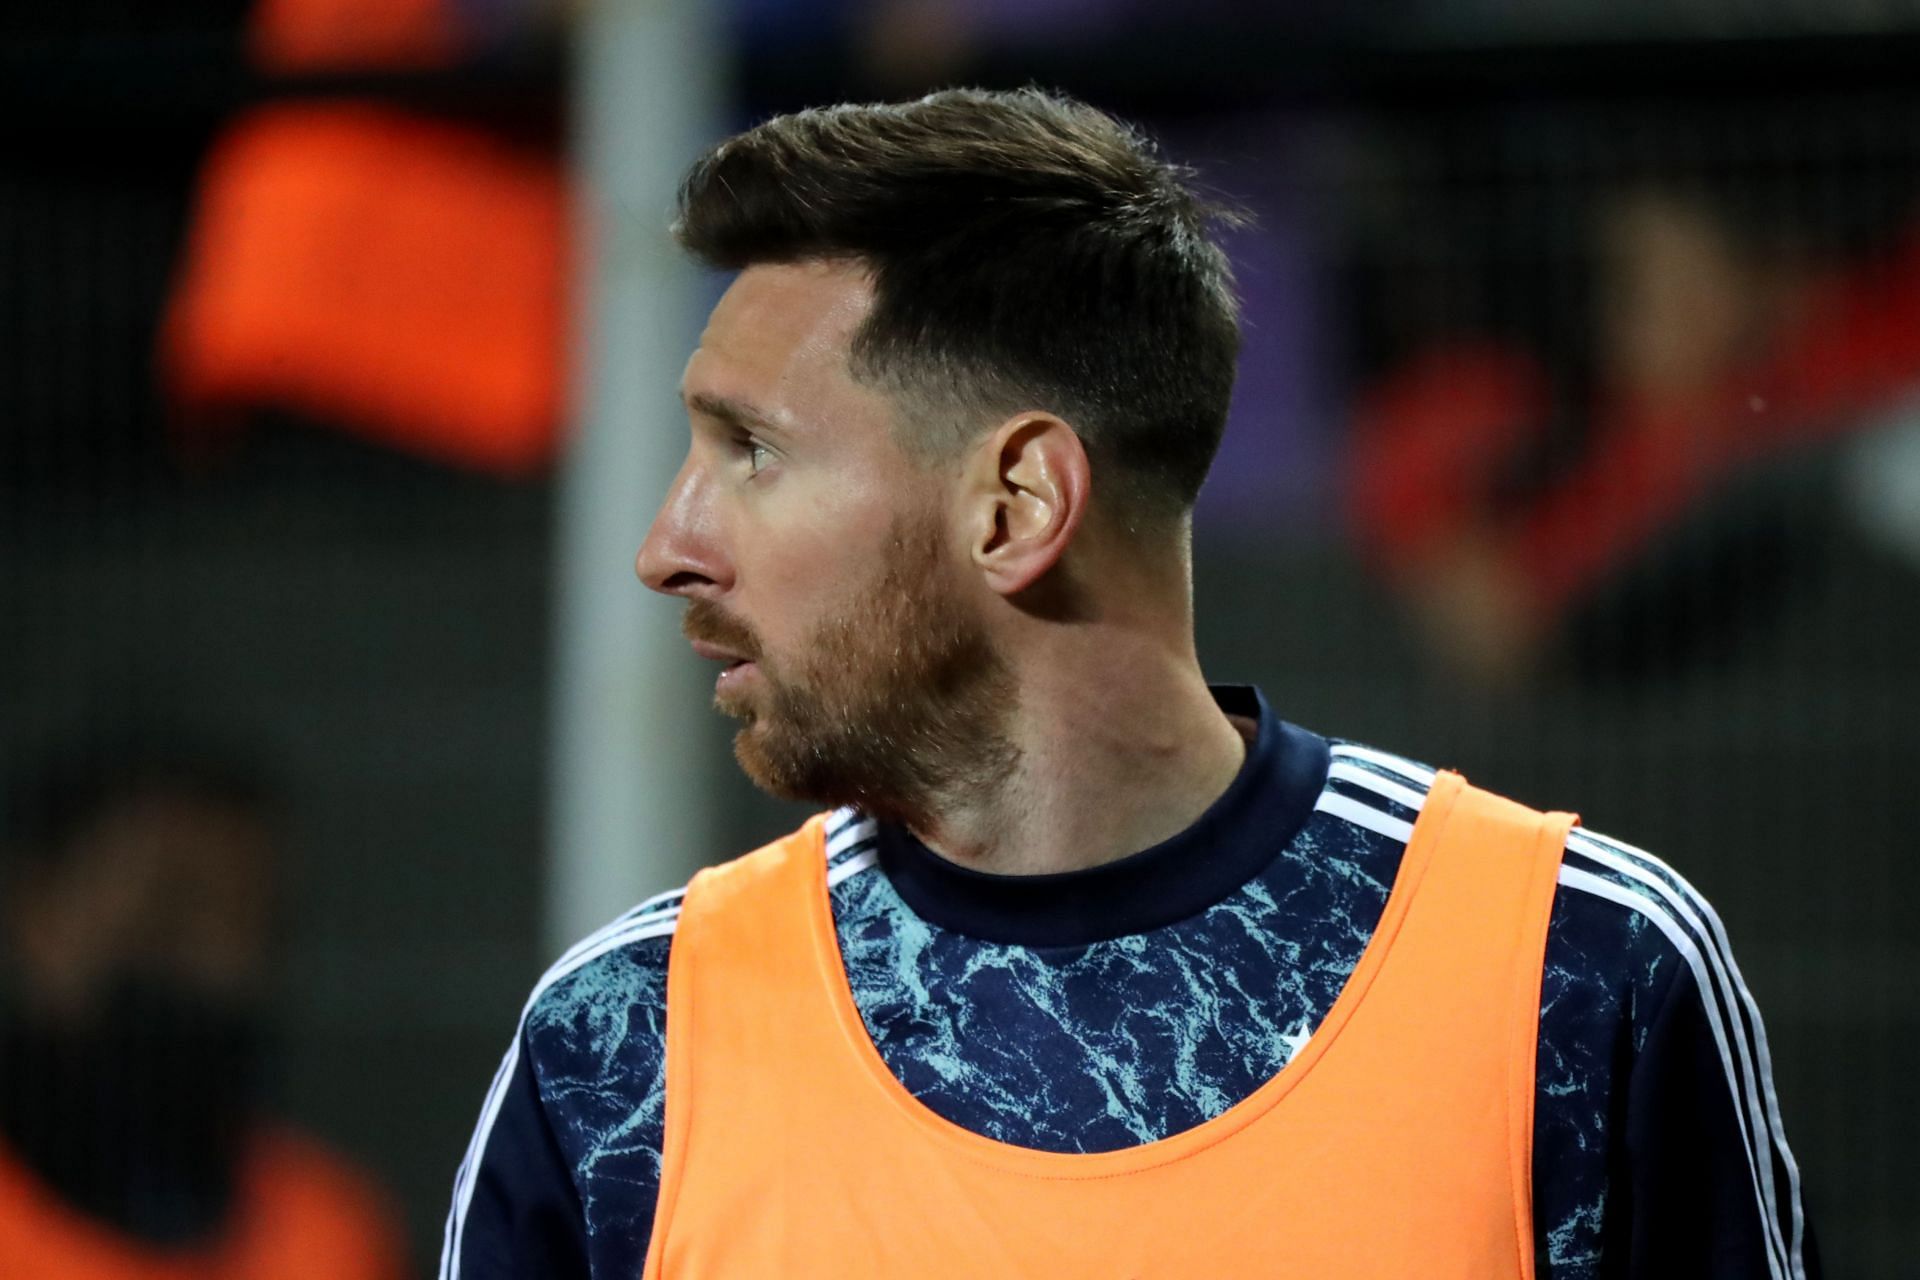 Argentina manager Lionel Scanlon has confirmed Lionel Messi will feature against Brazil.